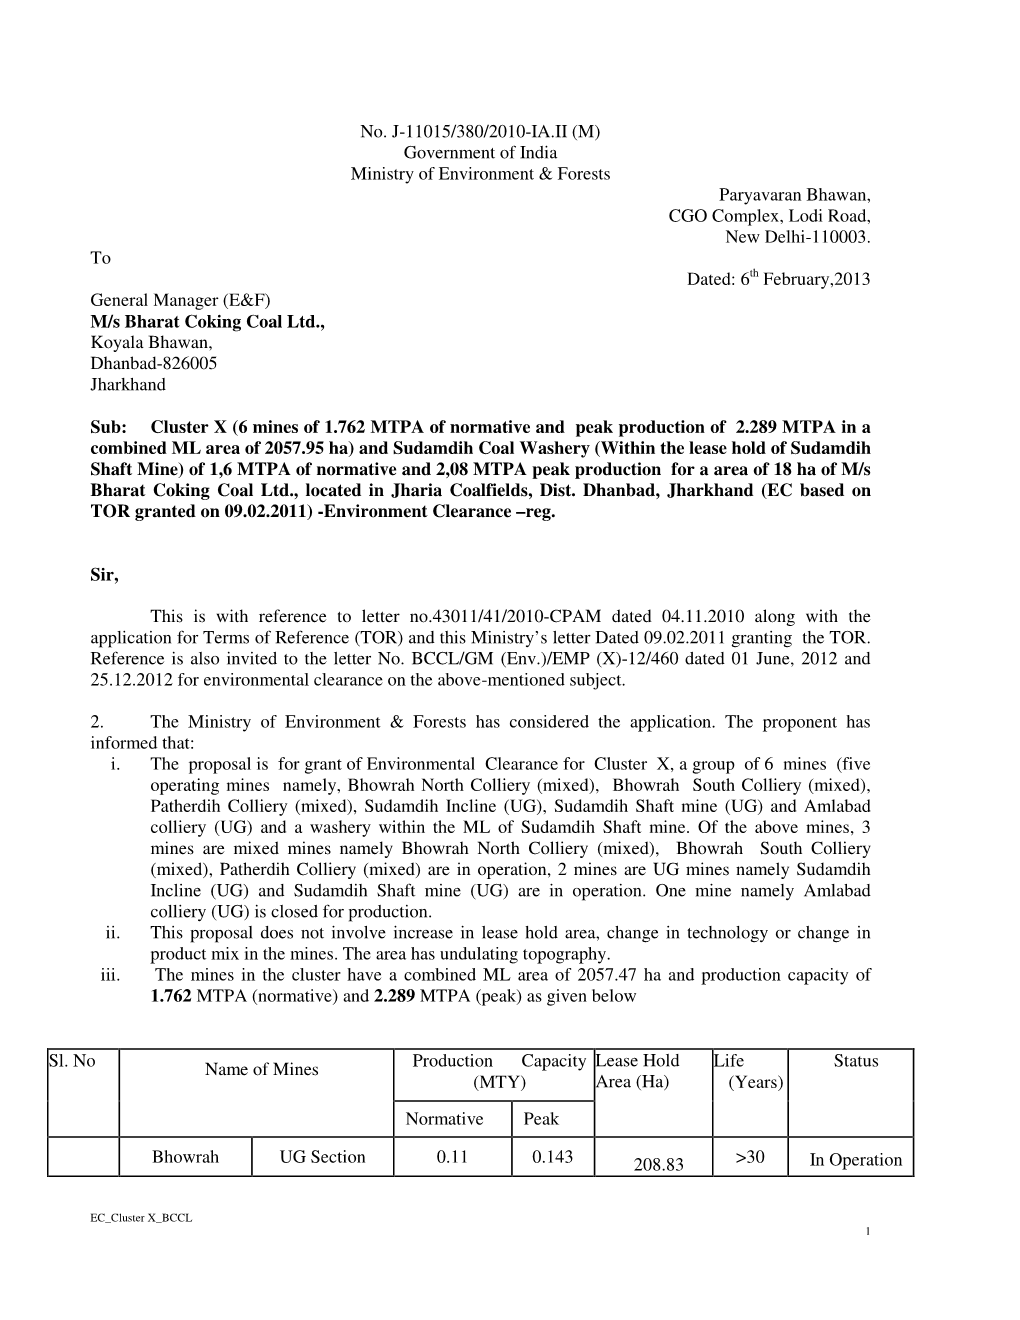 (M) Government of India Ministry of Environment & Forests